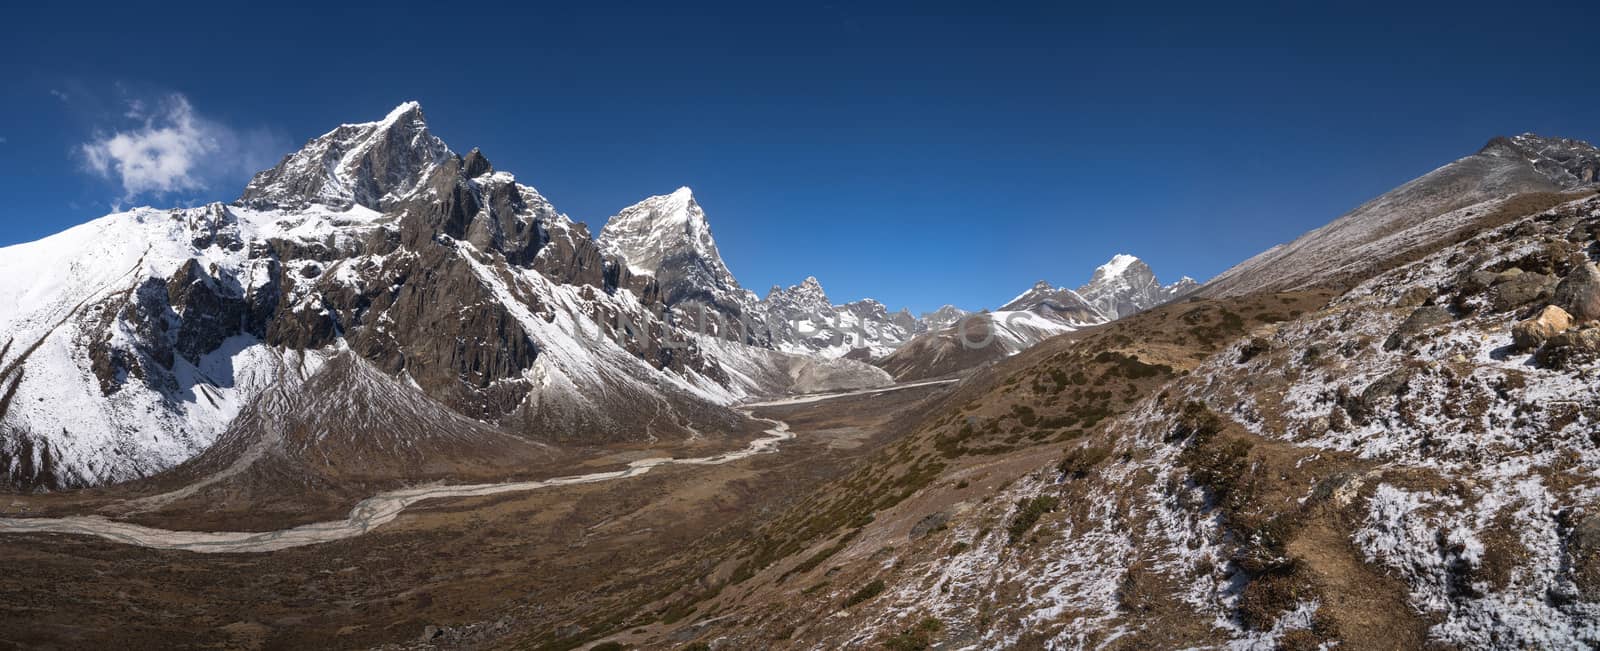 Himalayas panorama with Cholatse and Taboche peaks by Arsgera